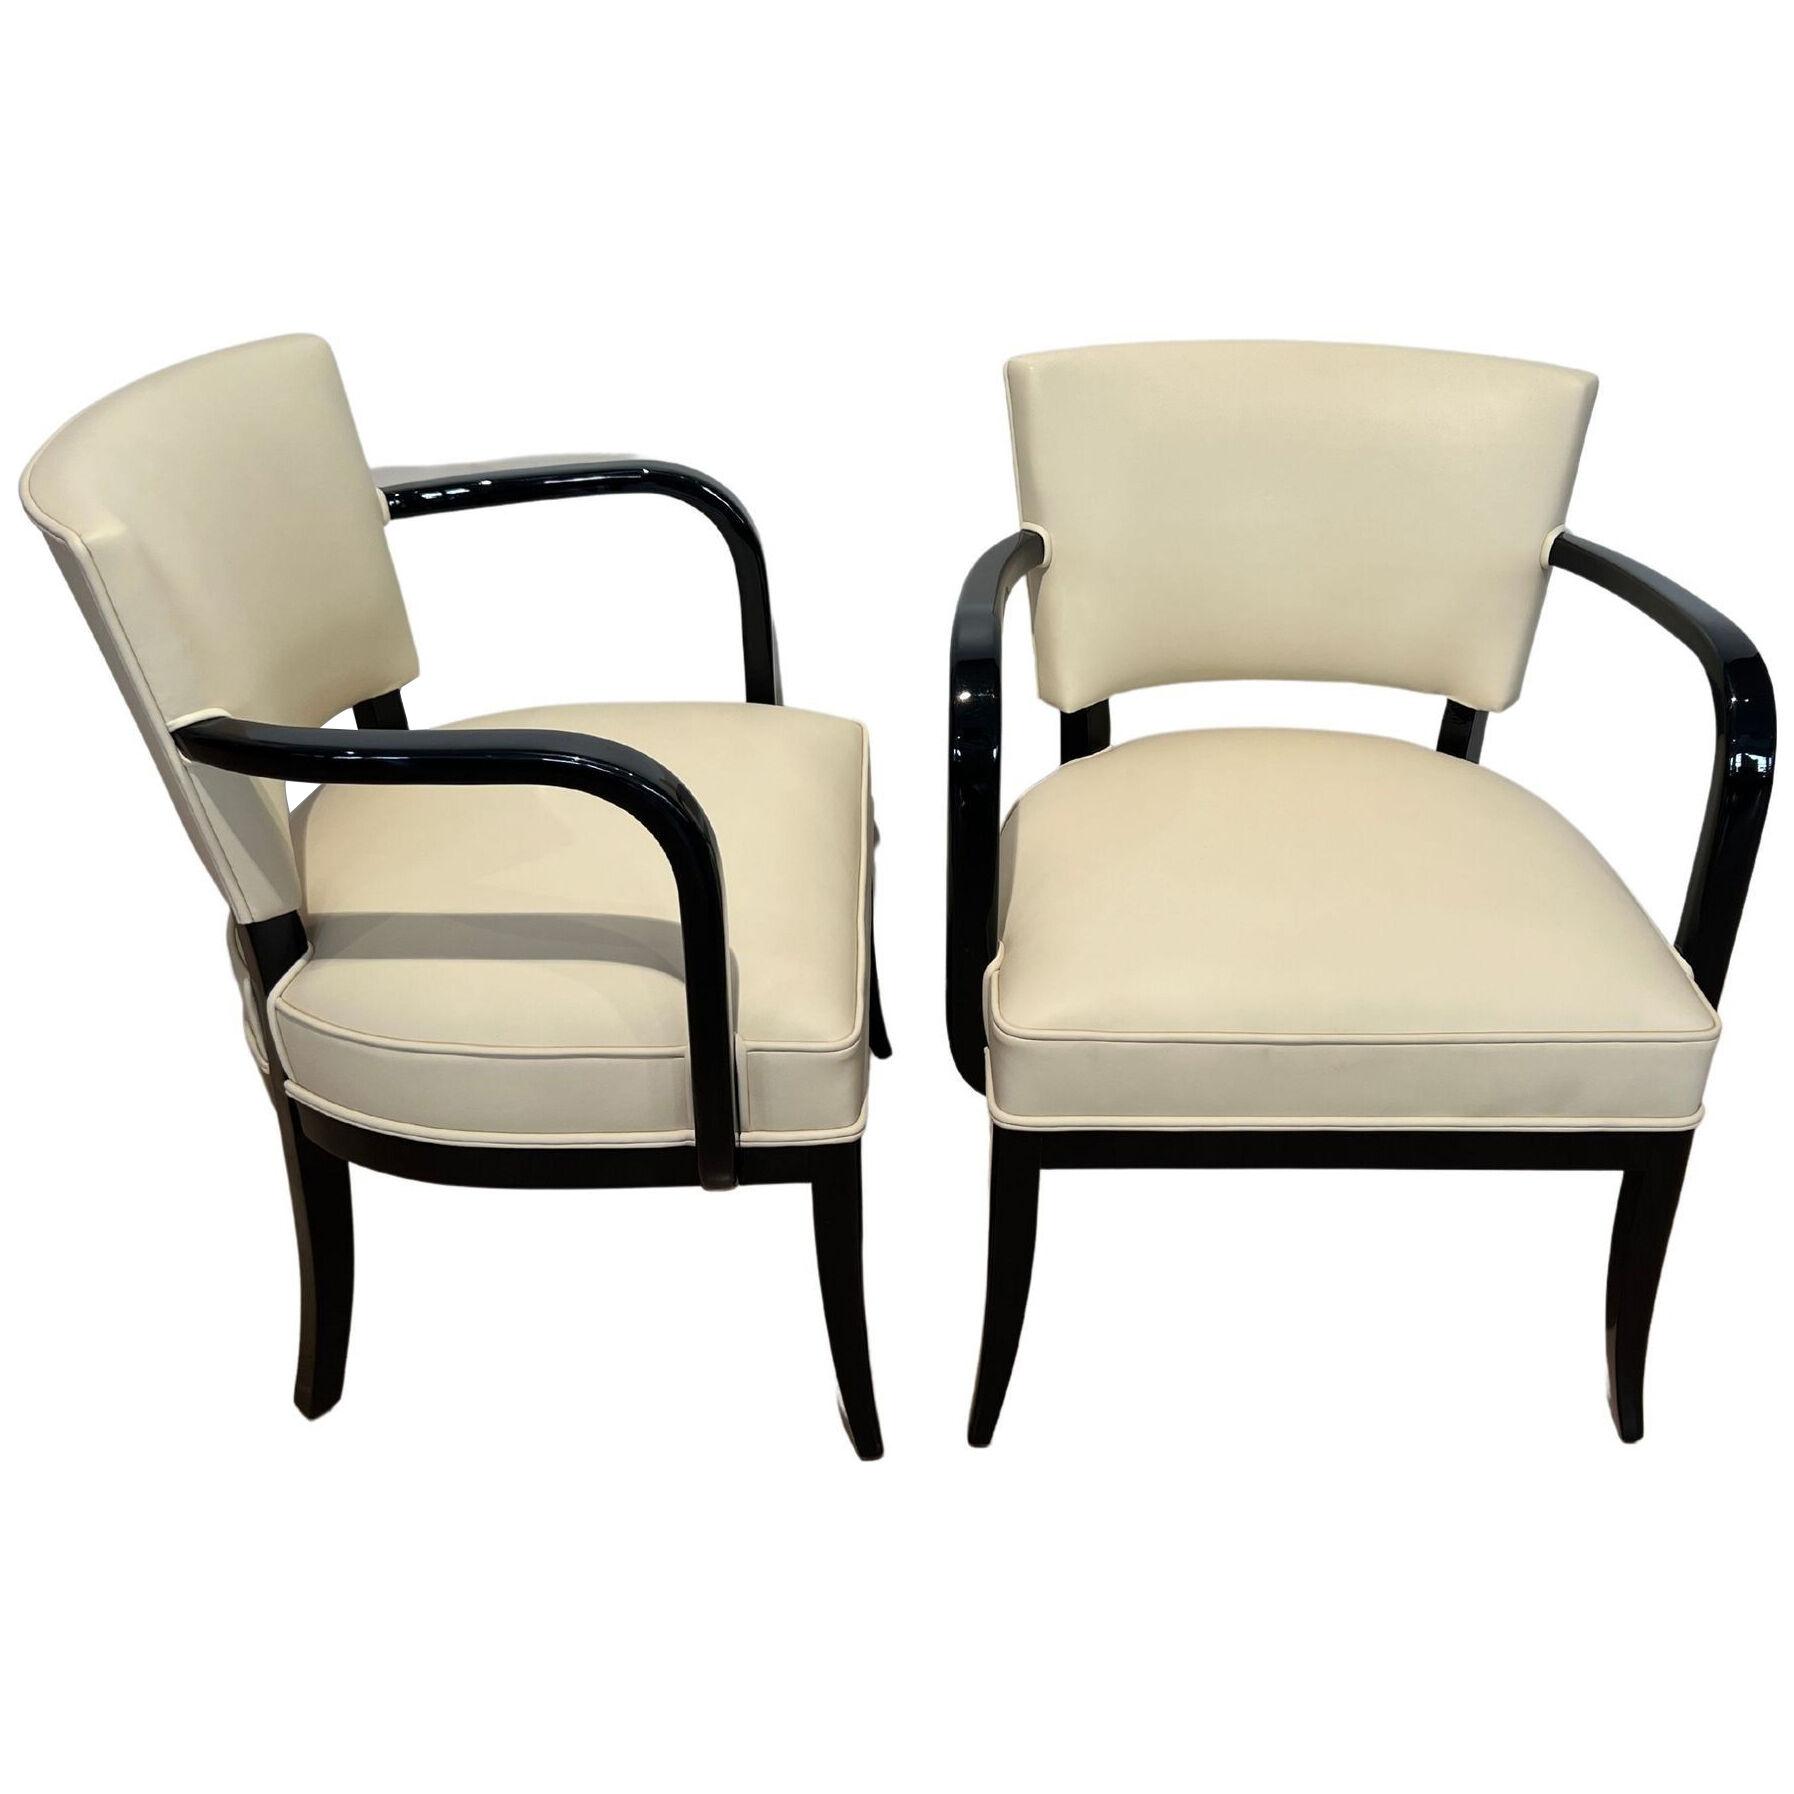 Pair of large Art Deco Armchairs, Black Lacquer, Creme Leather, France, 1930s